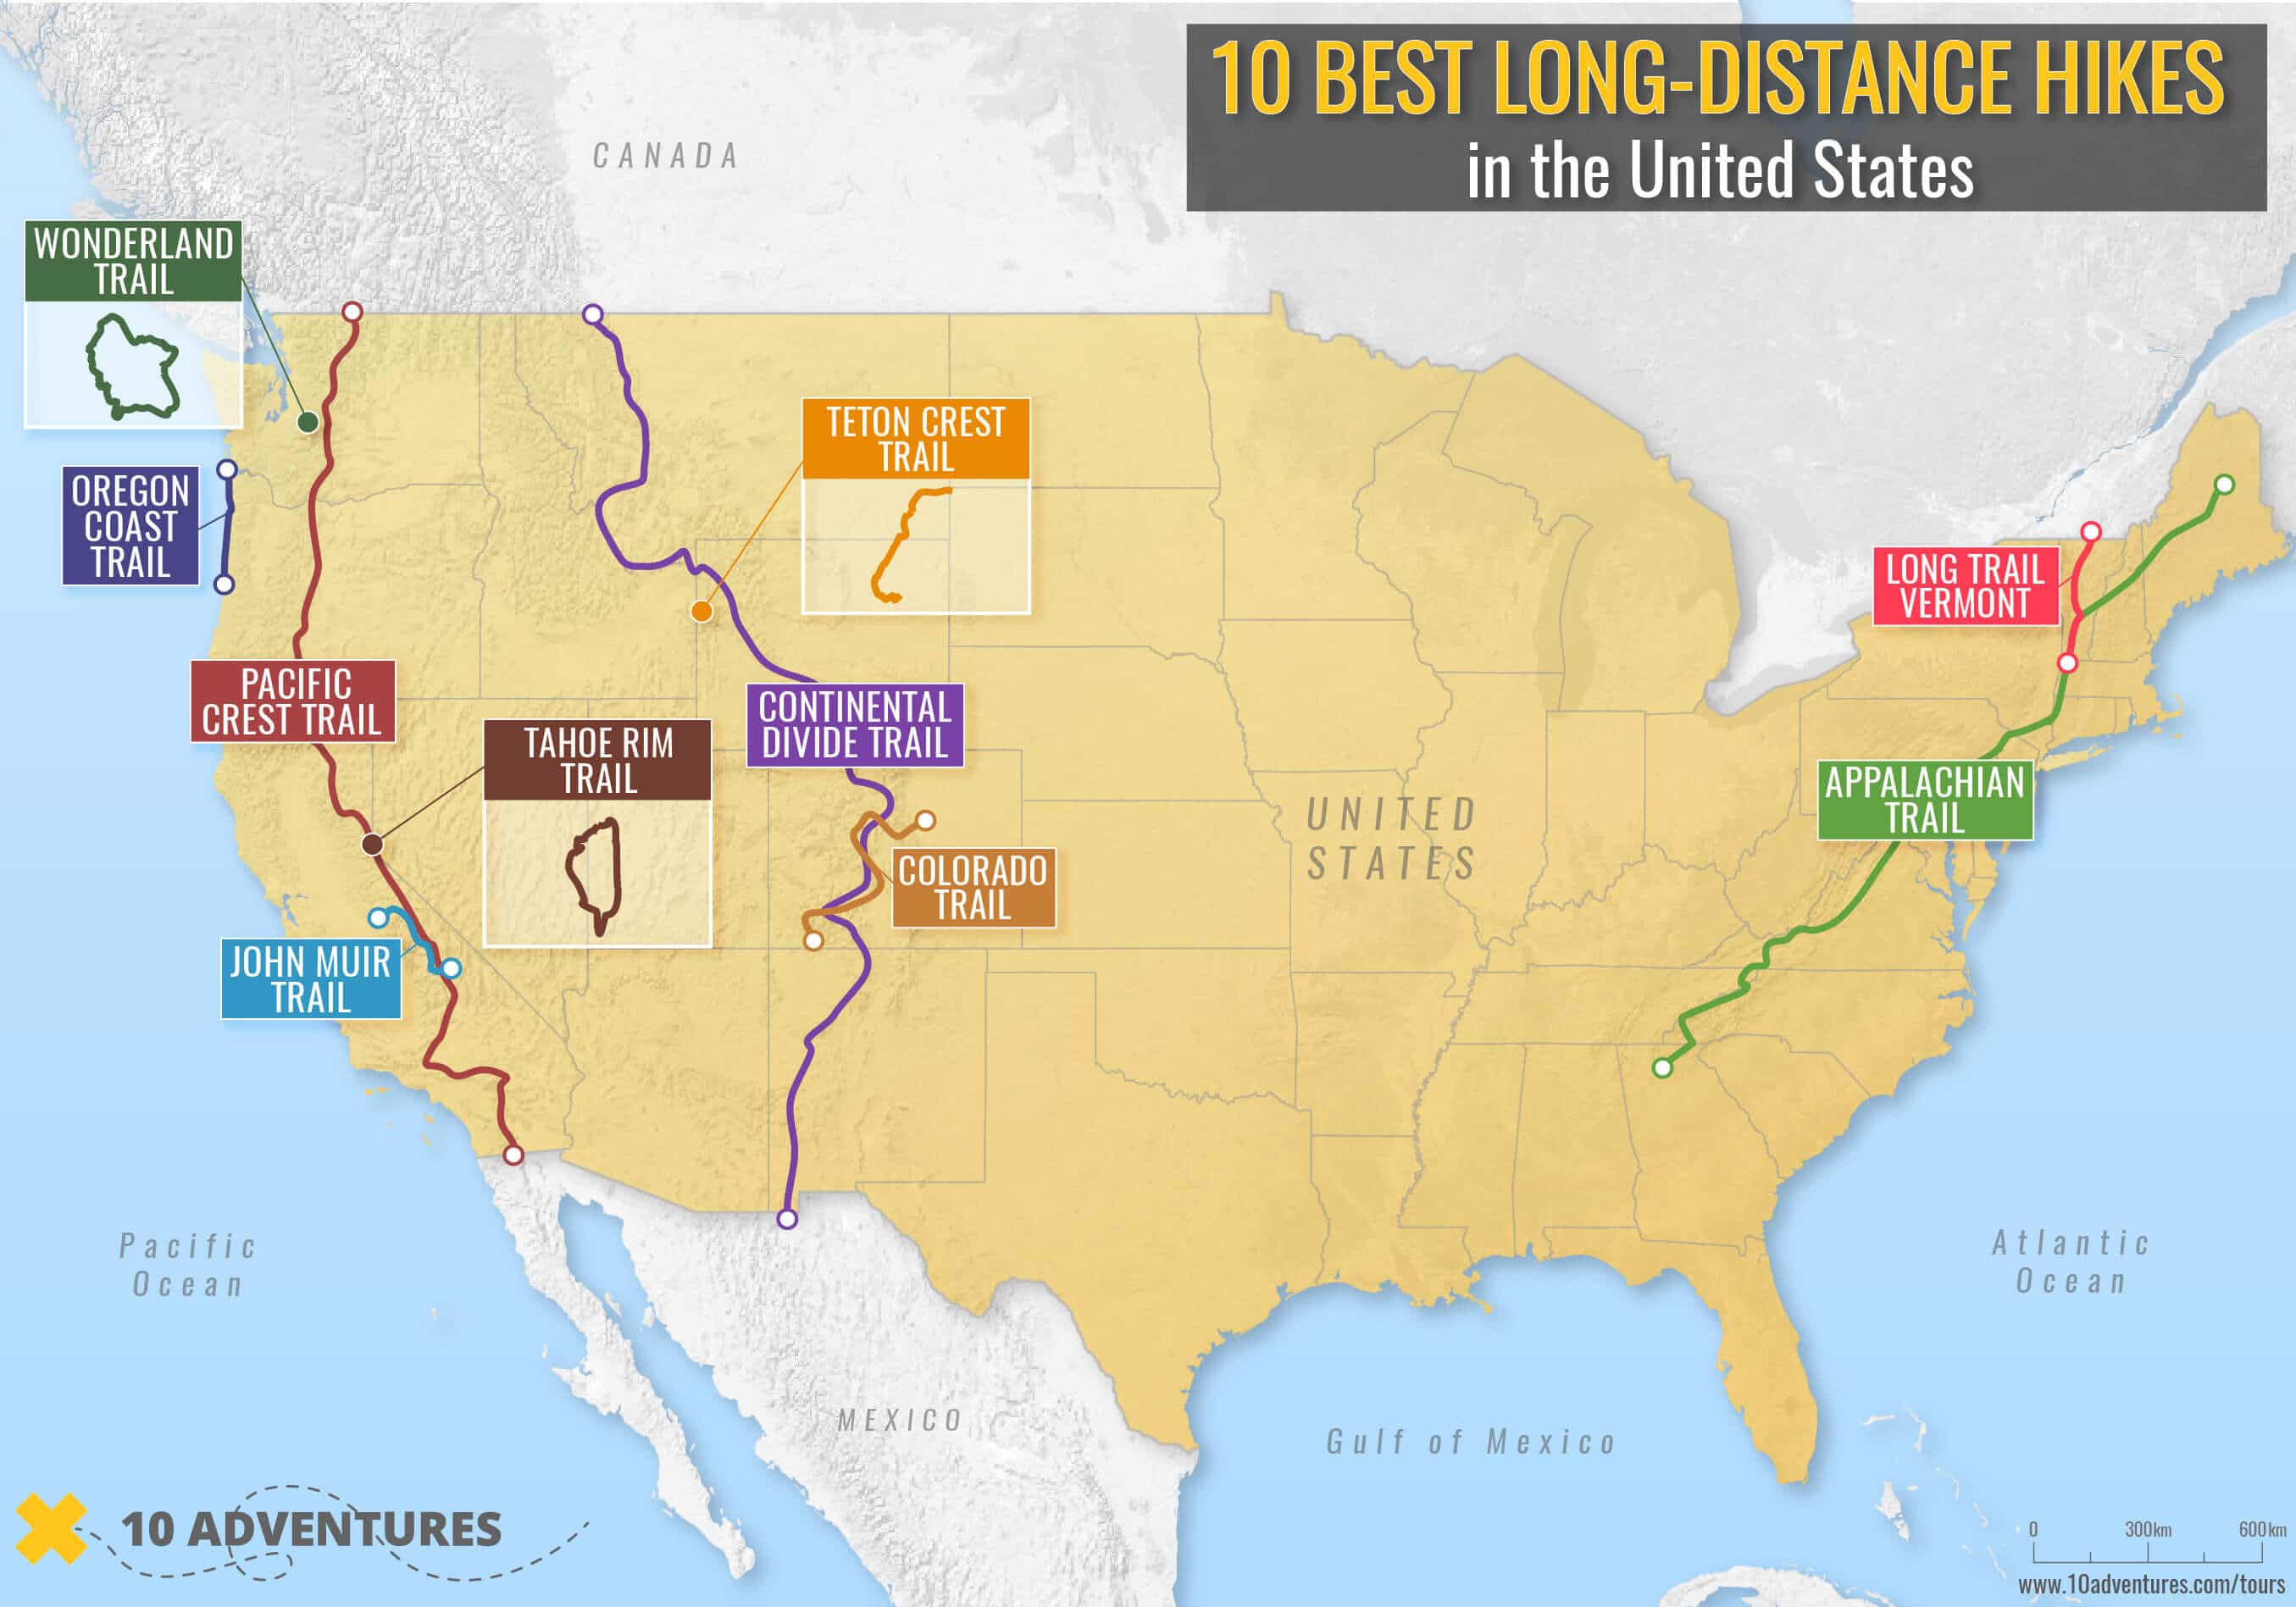 The map of best long-distance hikes in the United States